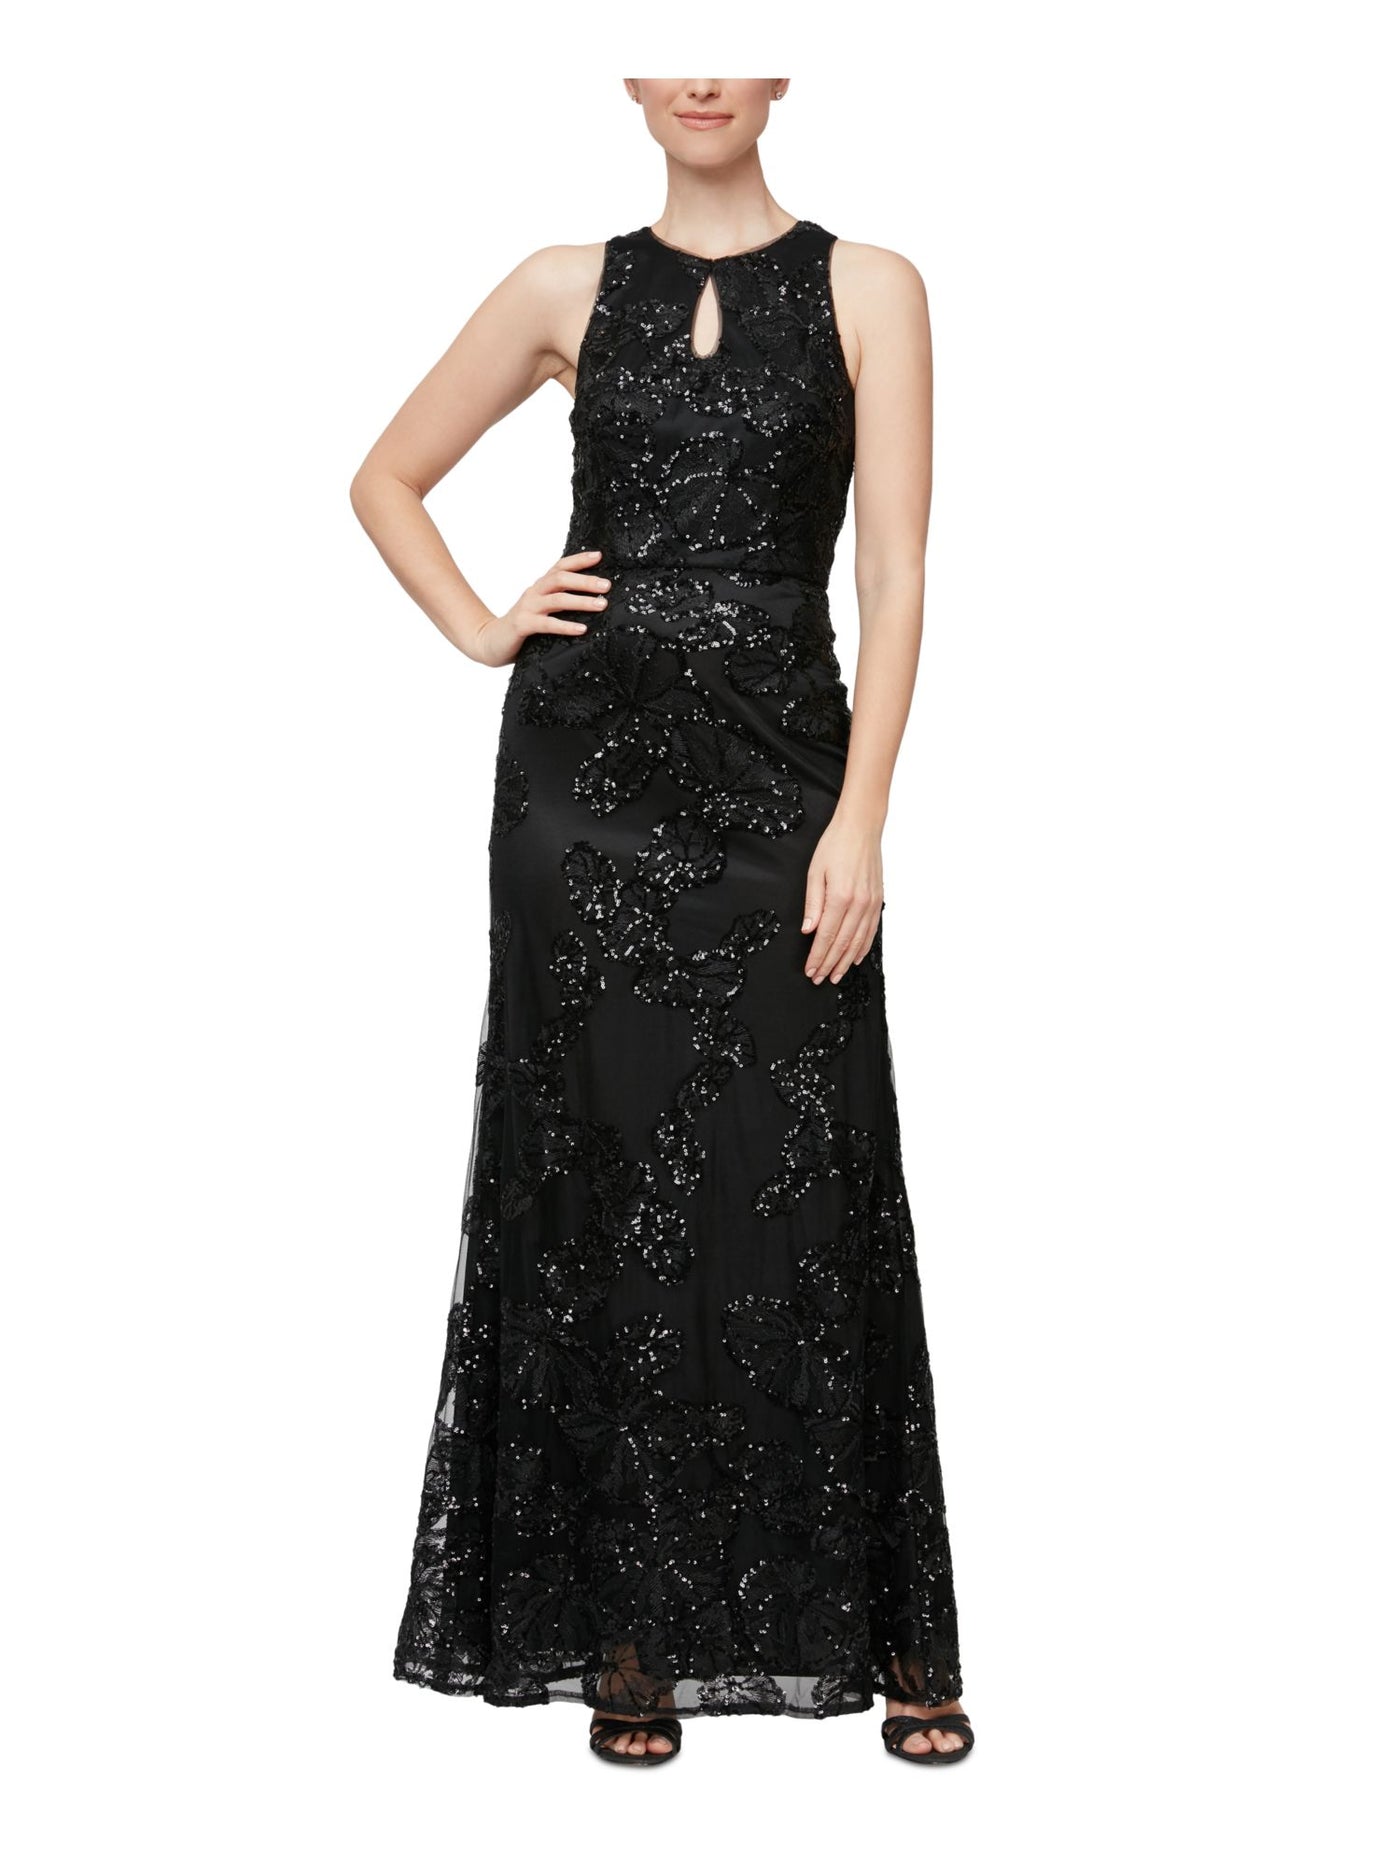 ALEX & EVE BY ALEX EVENINGS Womens Black Sequined Zippered Lined Floral Sleeveless Keyhole Full-Length Evening Gown Dress 2